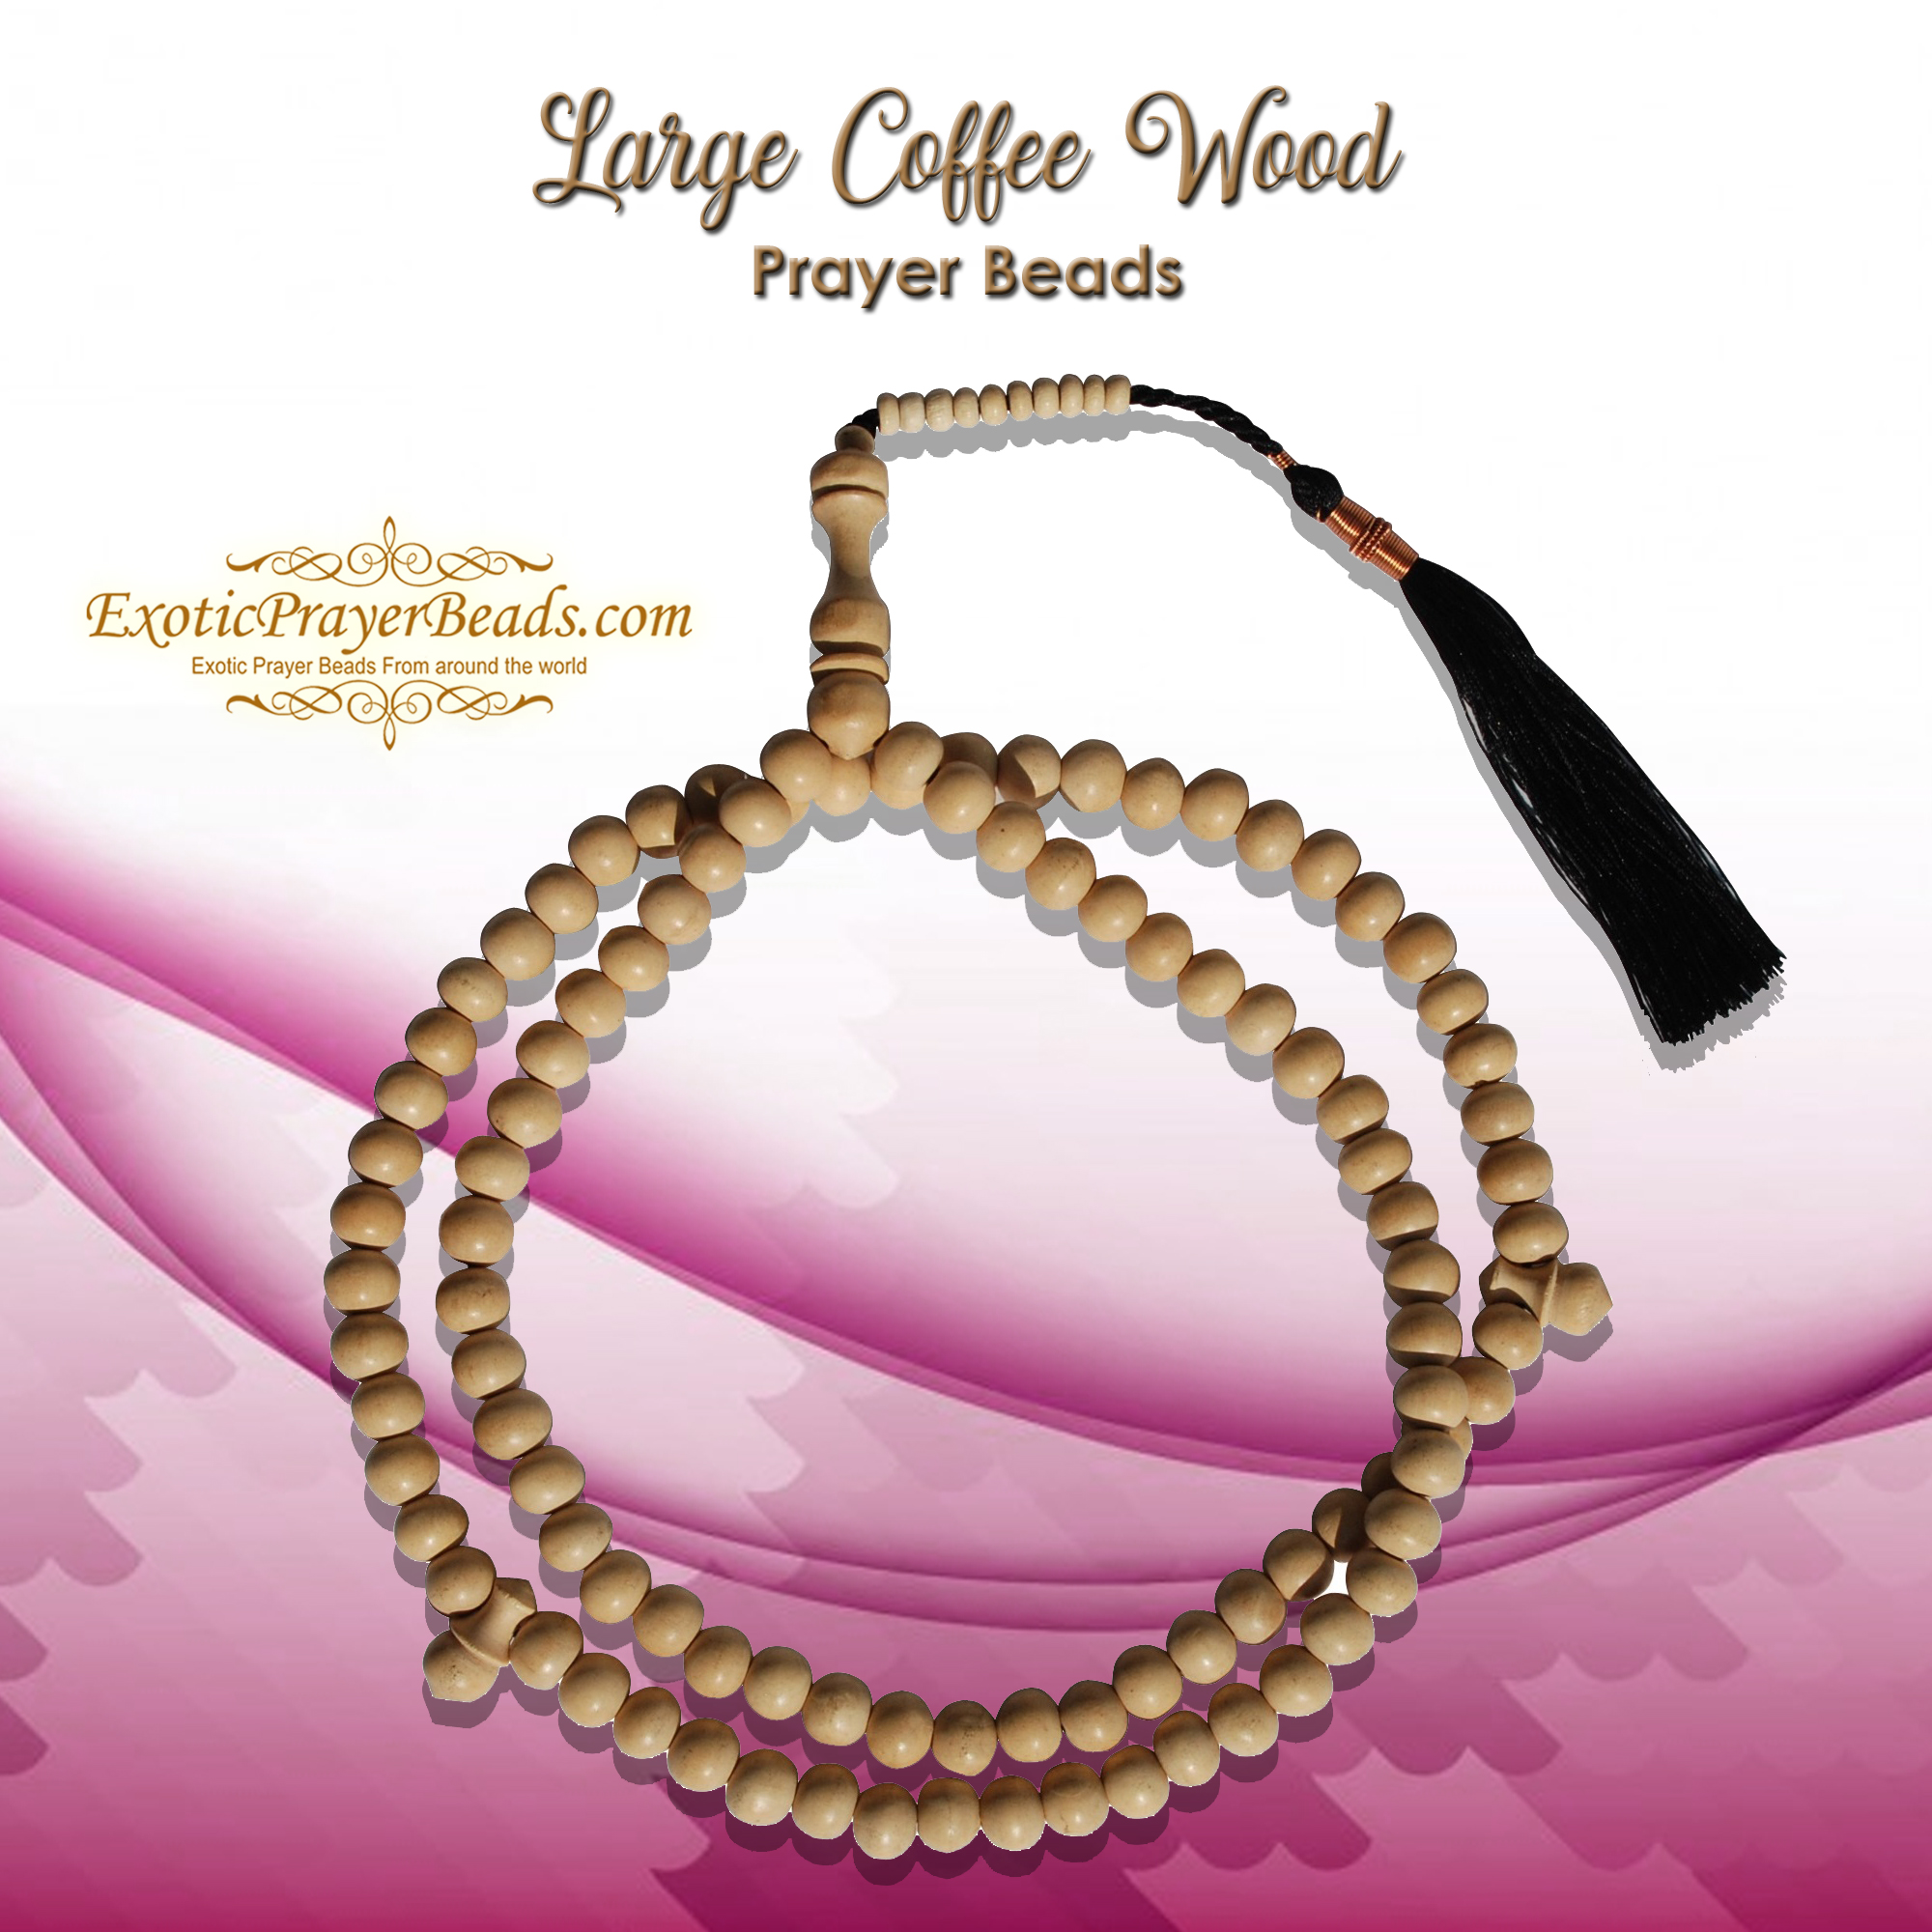 Large Coffee Wood Prayer Beads from Indonesia